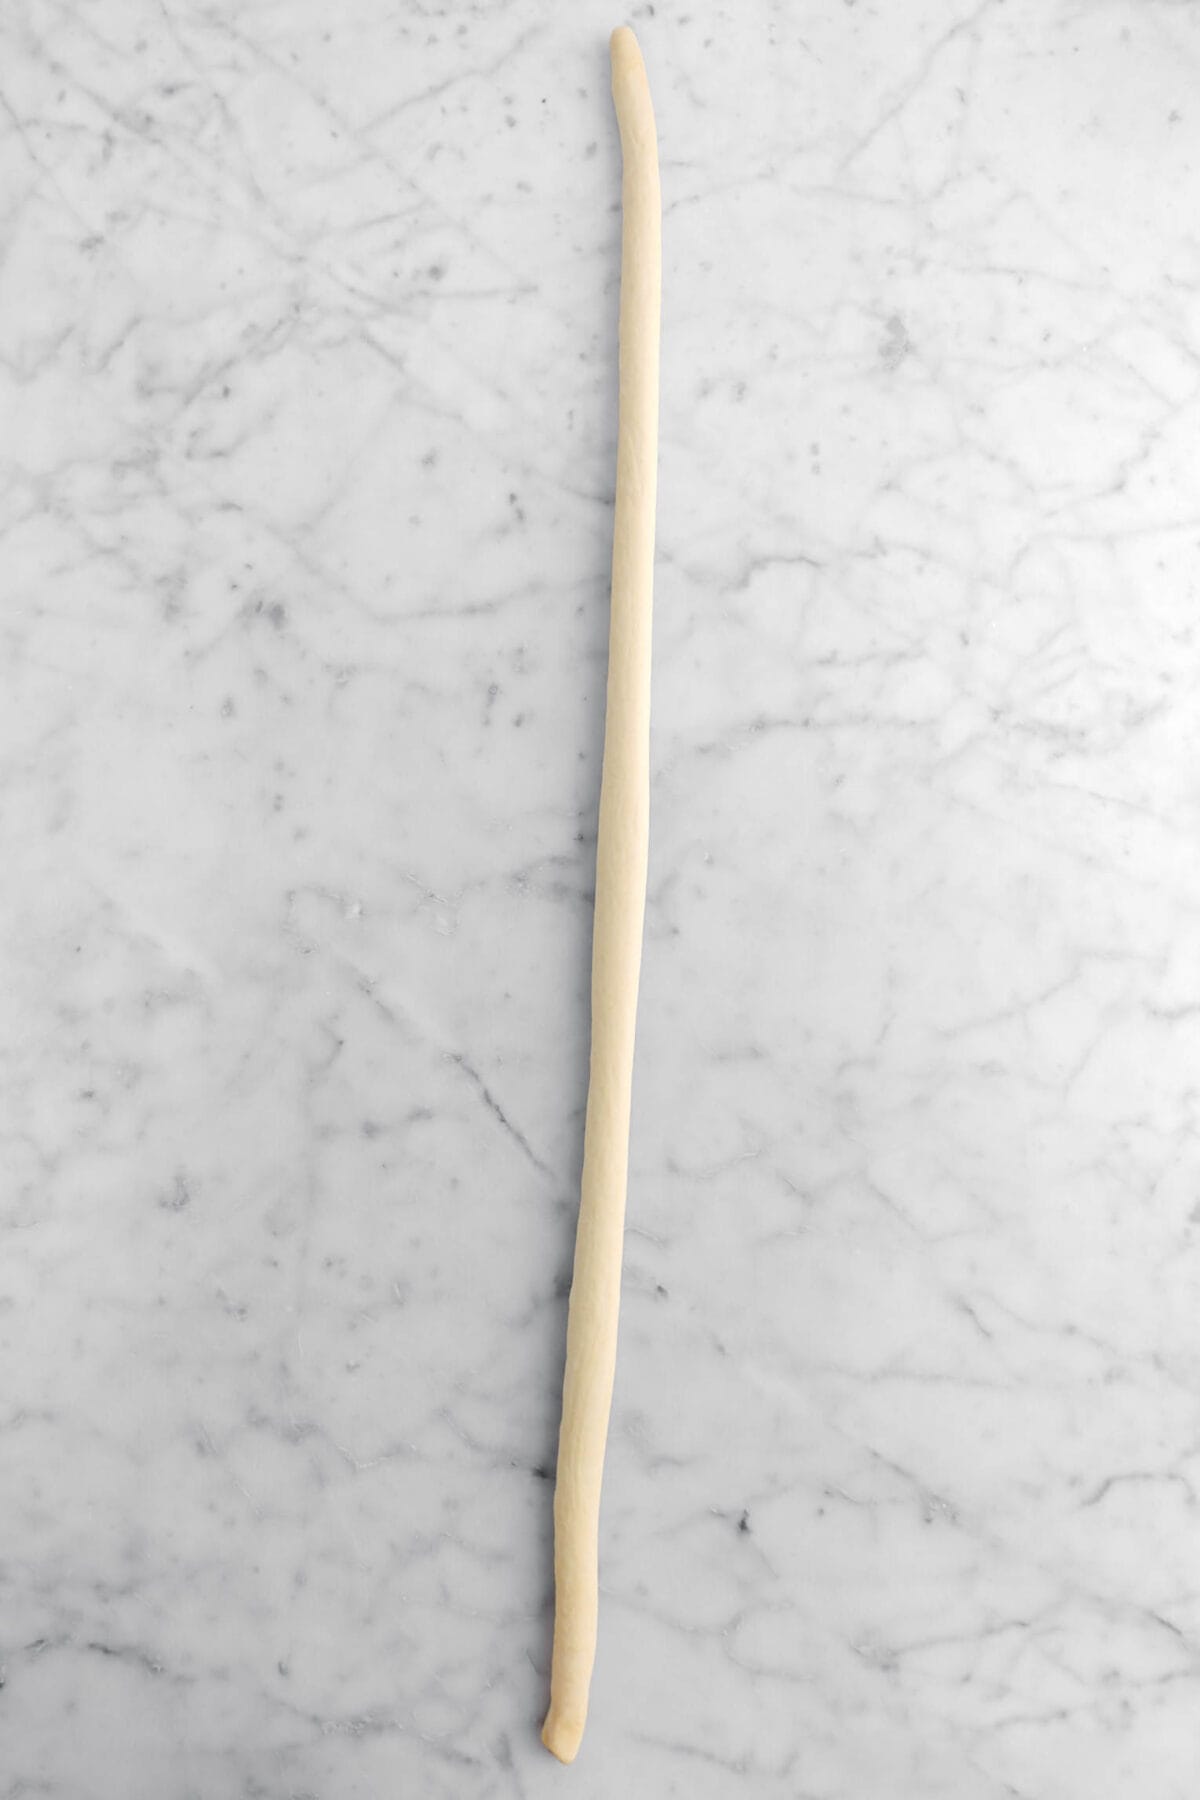 long rope of dough on marble surface.